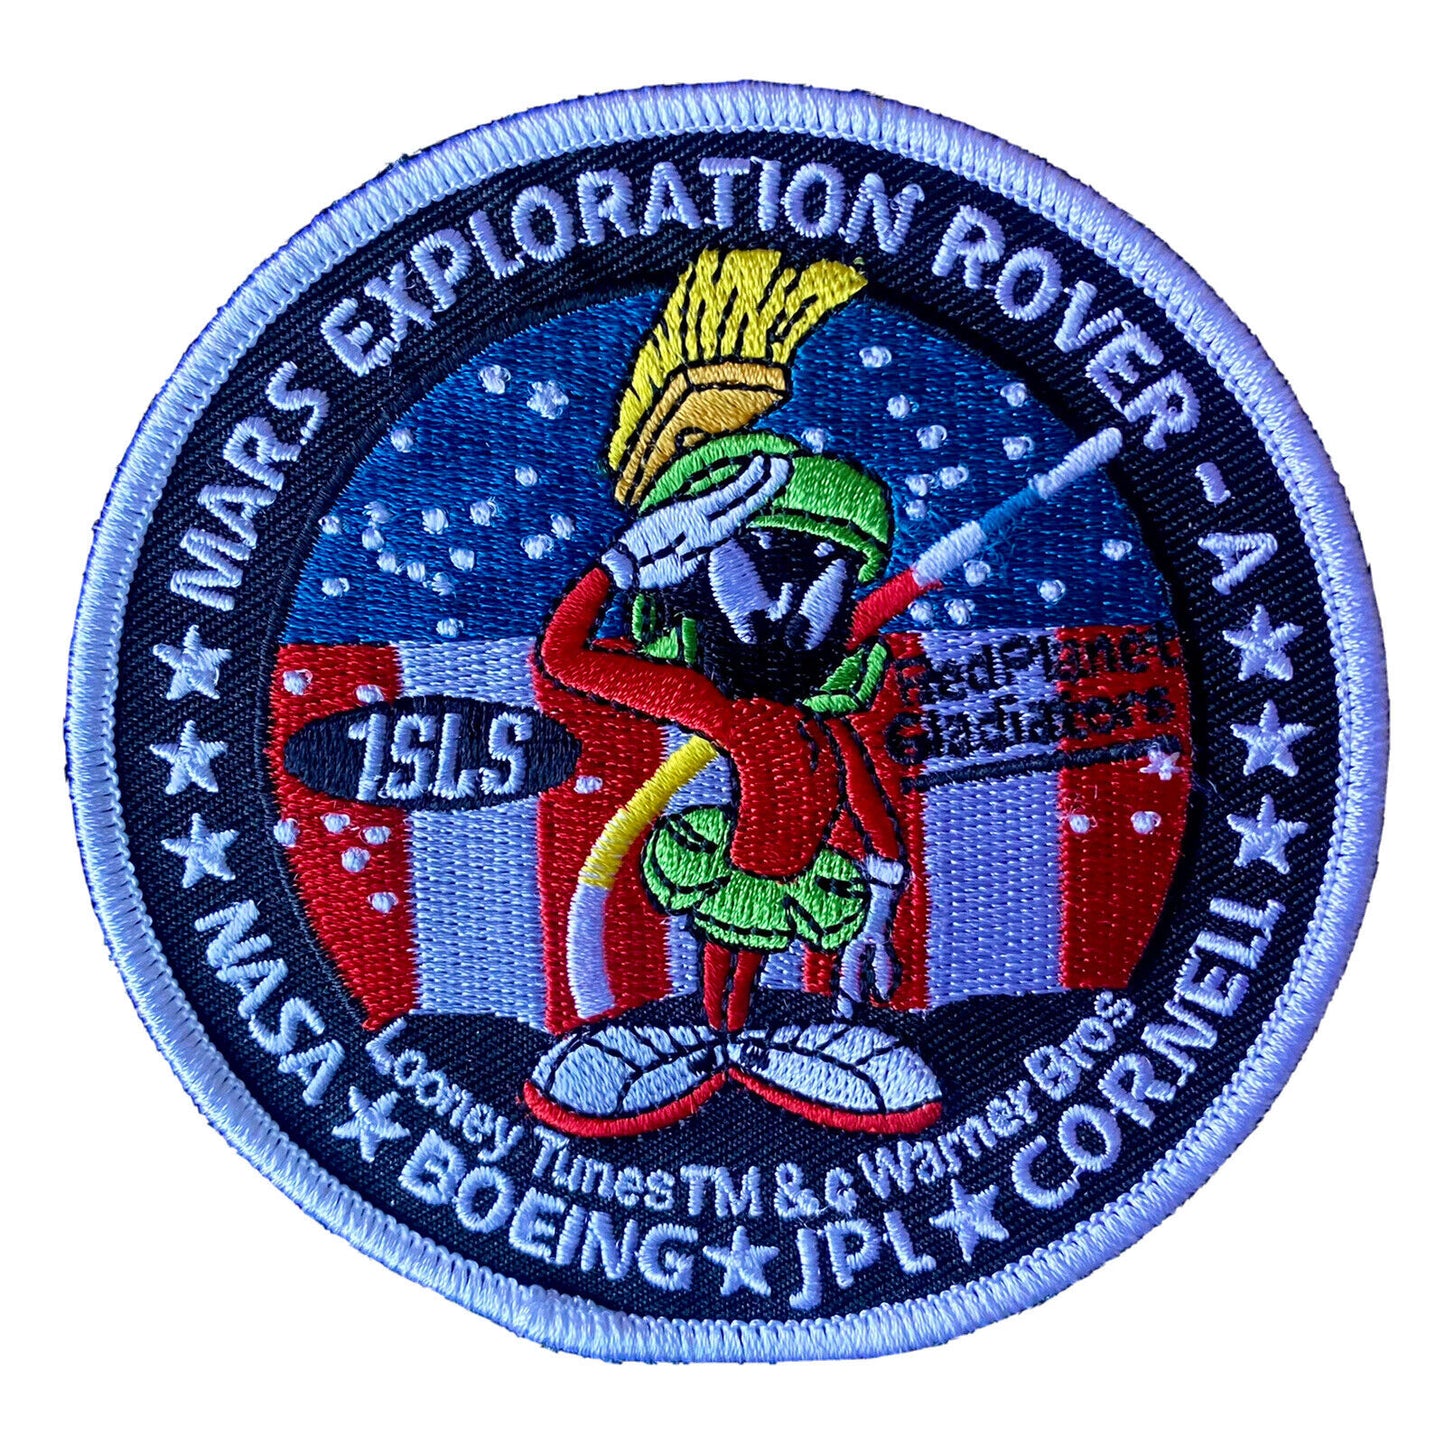 NASA JPL MARVIN THE MARTIAN PATCH MARS EXPLORATION ROVER SPACE MISSION - 3.5”